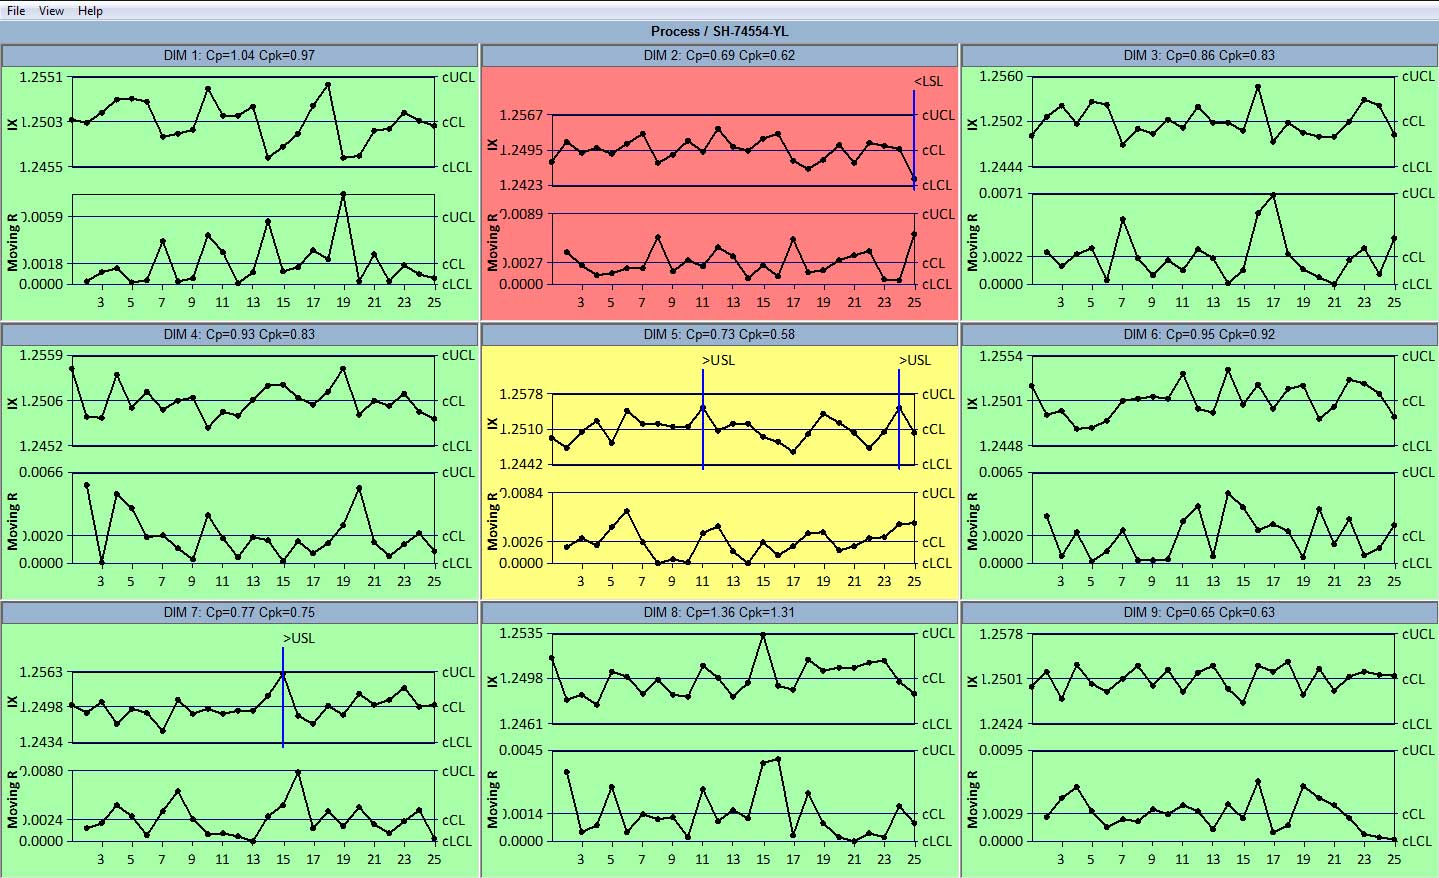 Types Of Control Charts In Tqm